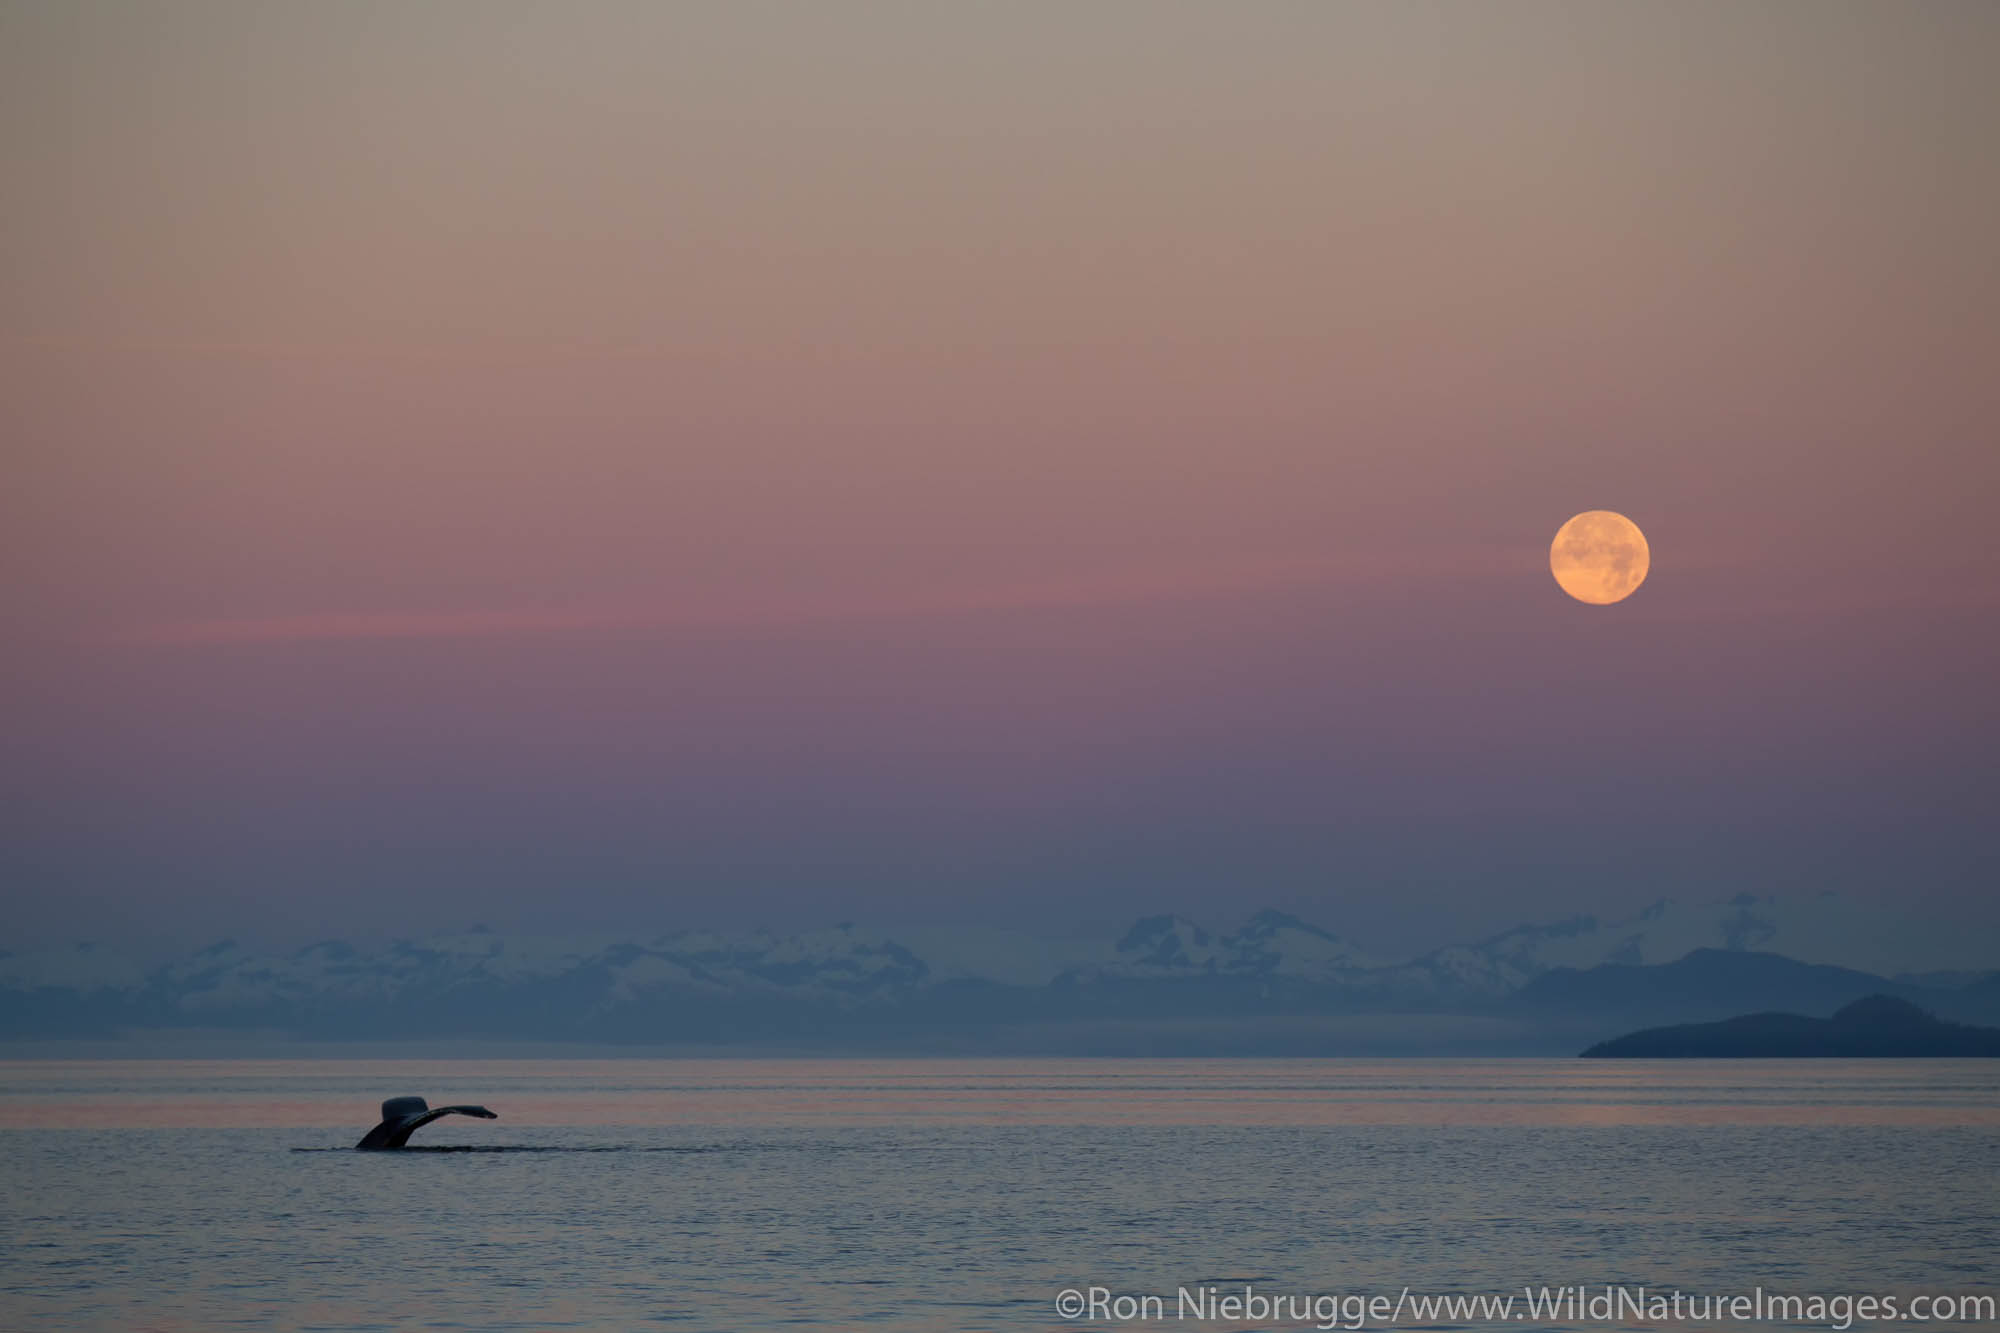 Humpback Whale at sunrise with full moon, Tongass National Forest, Alaska.